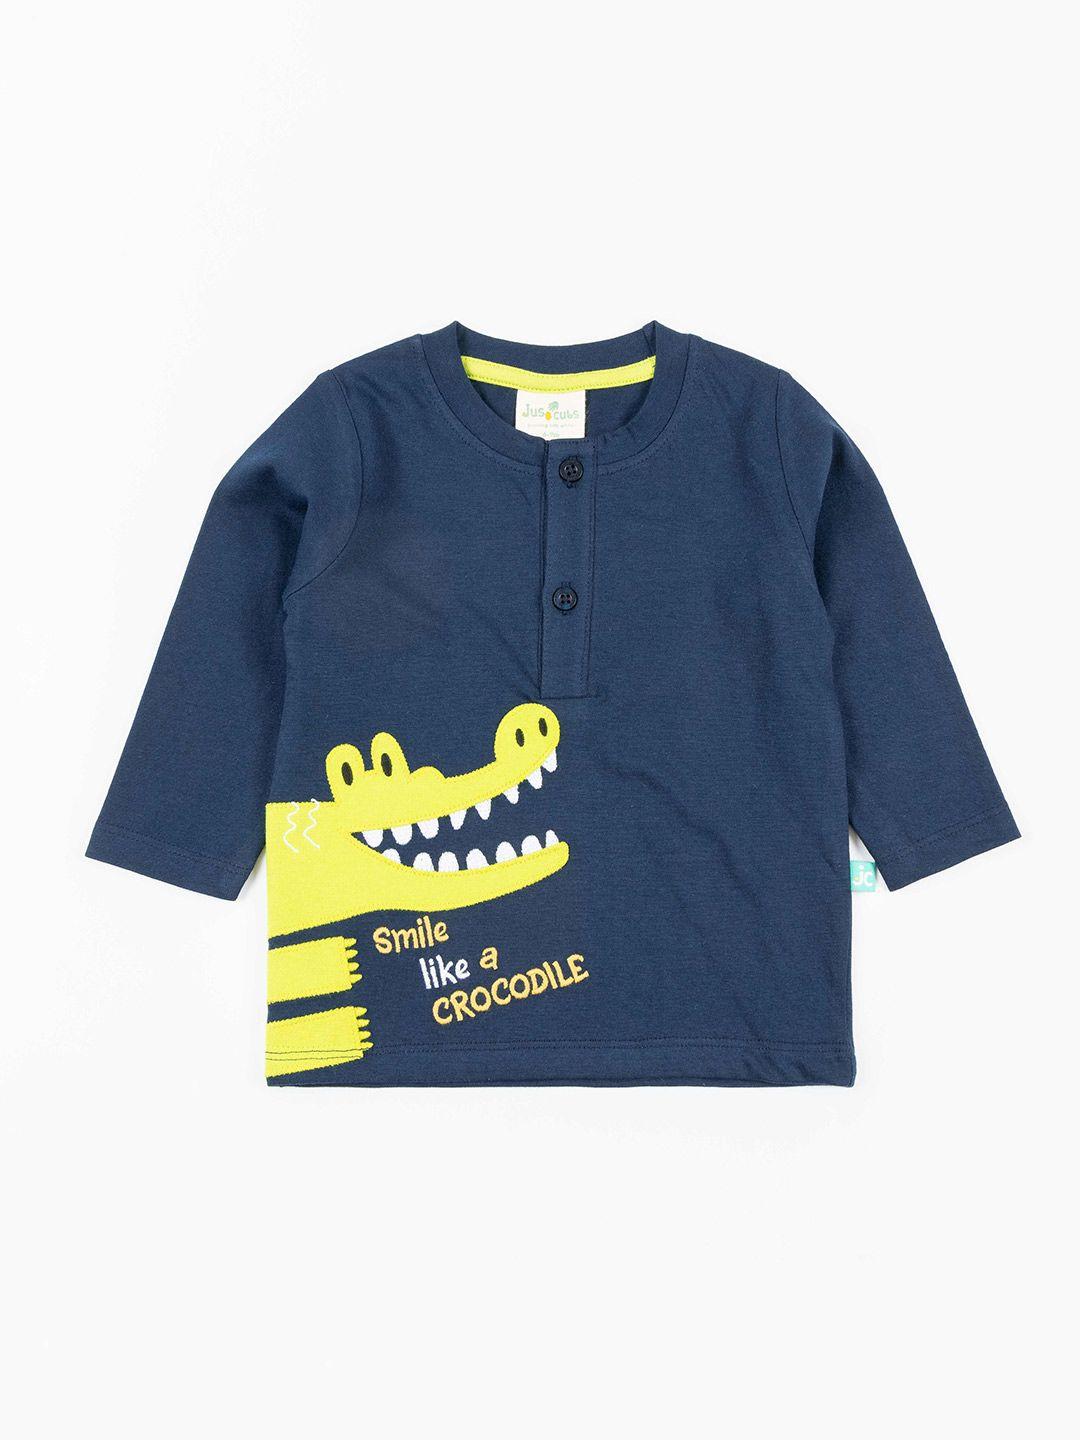 juscubs boys navy blue graphic printed henley neck cotton t-shirt